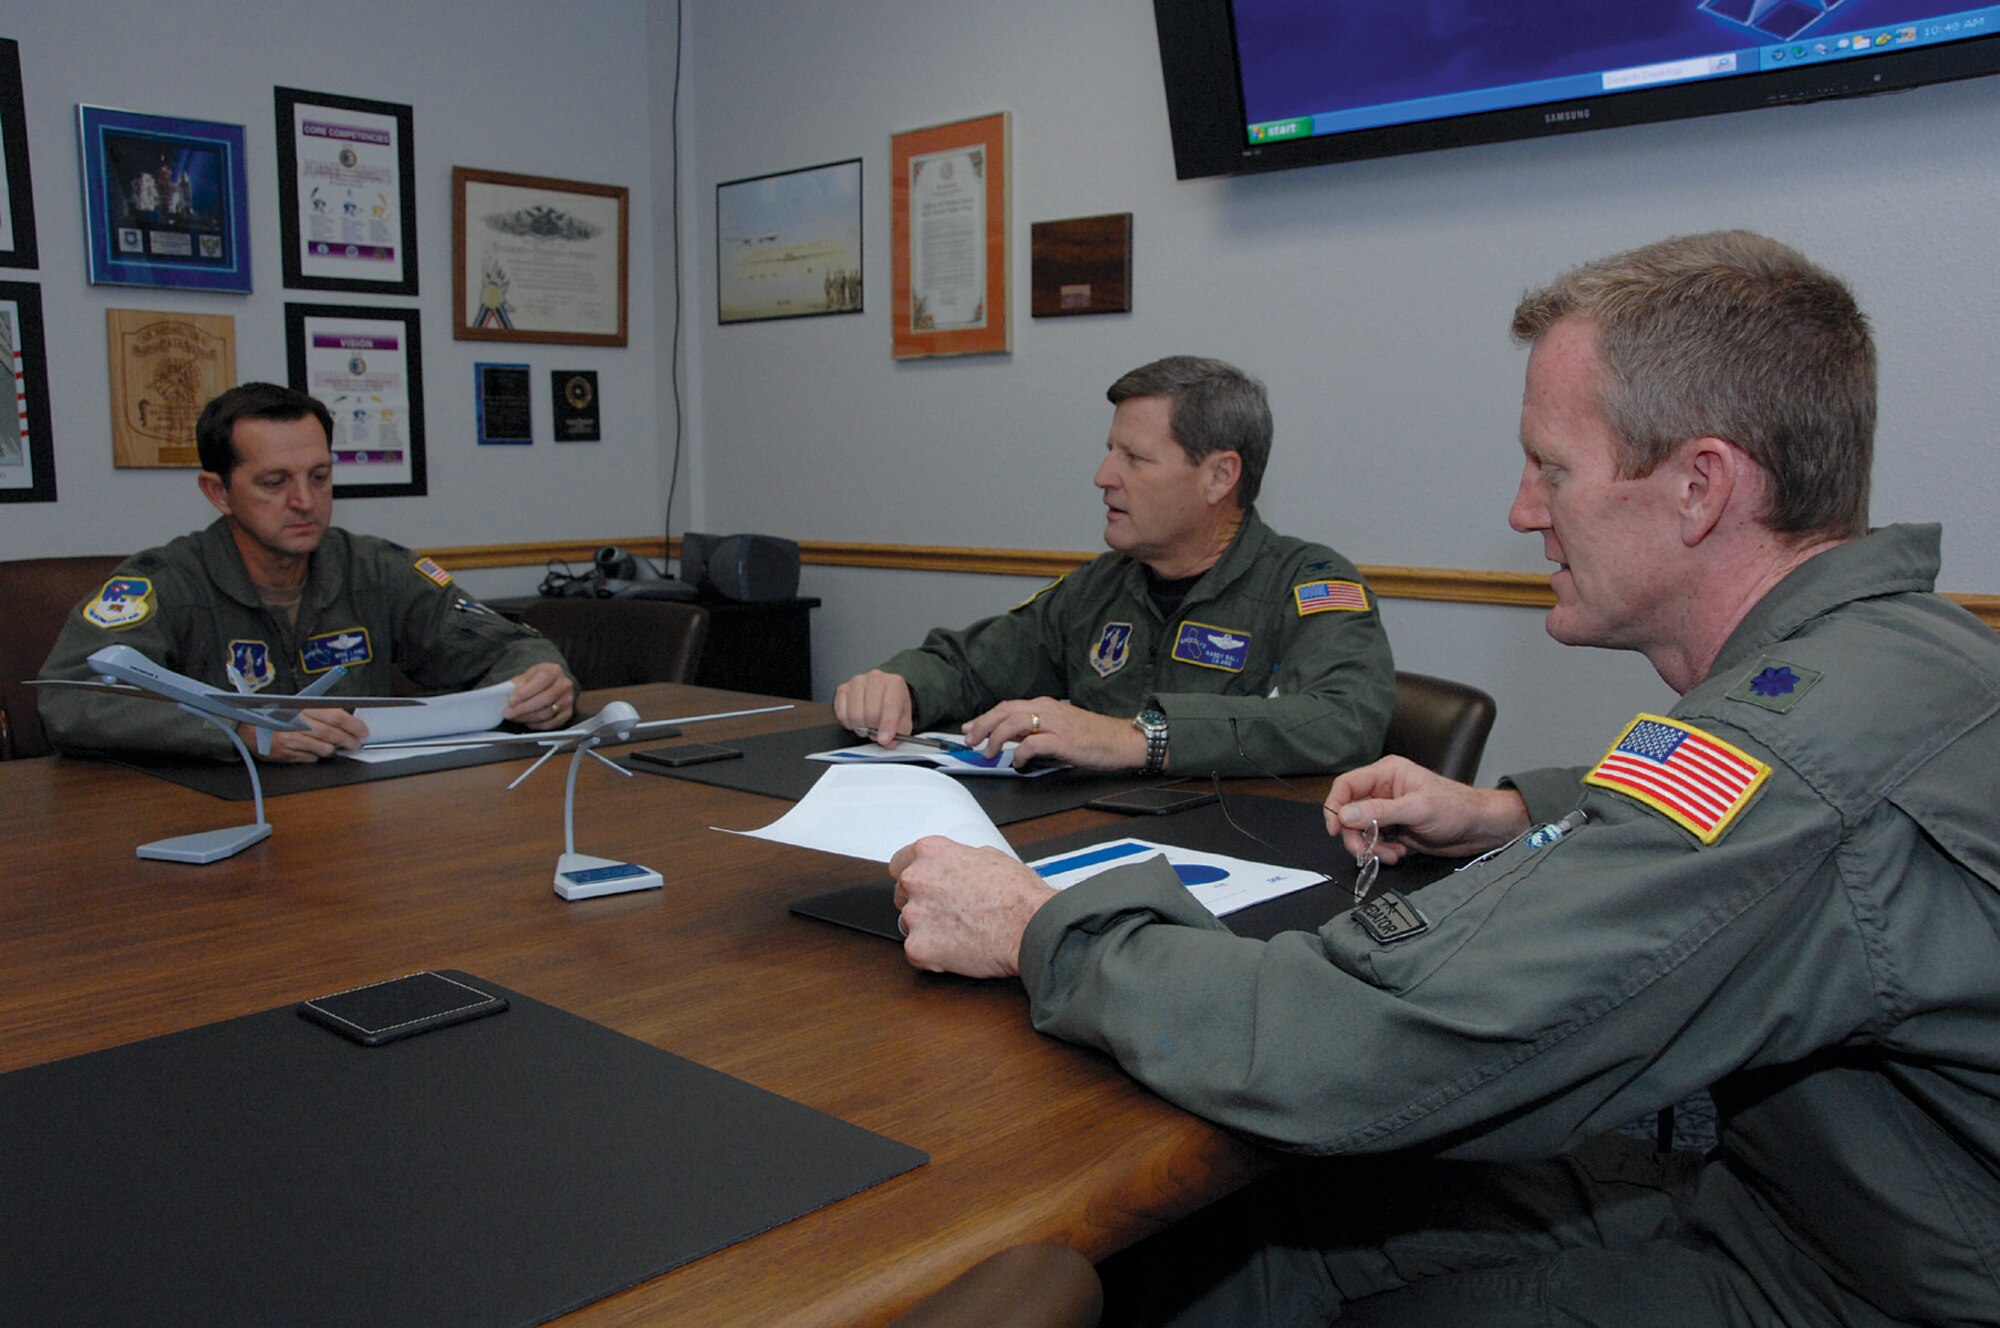 (Left to right) Lt. Col. Michael Lane, 163d Operations Support Flight commander, Col. Randall Ball, 163d Operations Group commander, and Lt. Col. Kirby Colas, 196th Reconnaissance Squadron commander, discuss preparations for the 163d Reconnaissance Wing's Predator flight training operations sheduled to begin in 2009. (Photo by Senior Airman Paul Duquette)